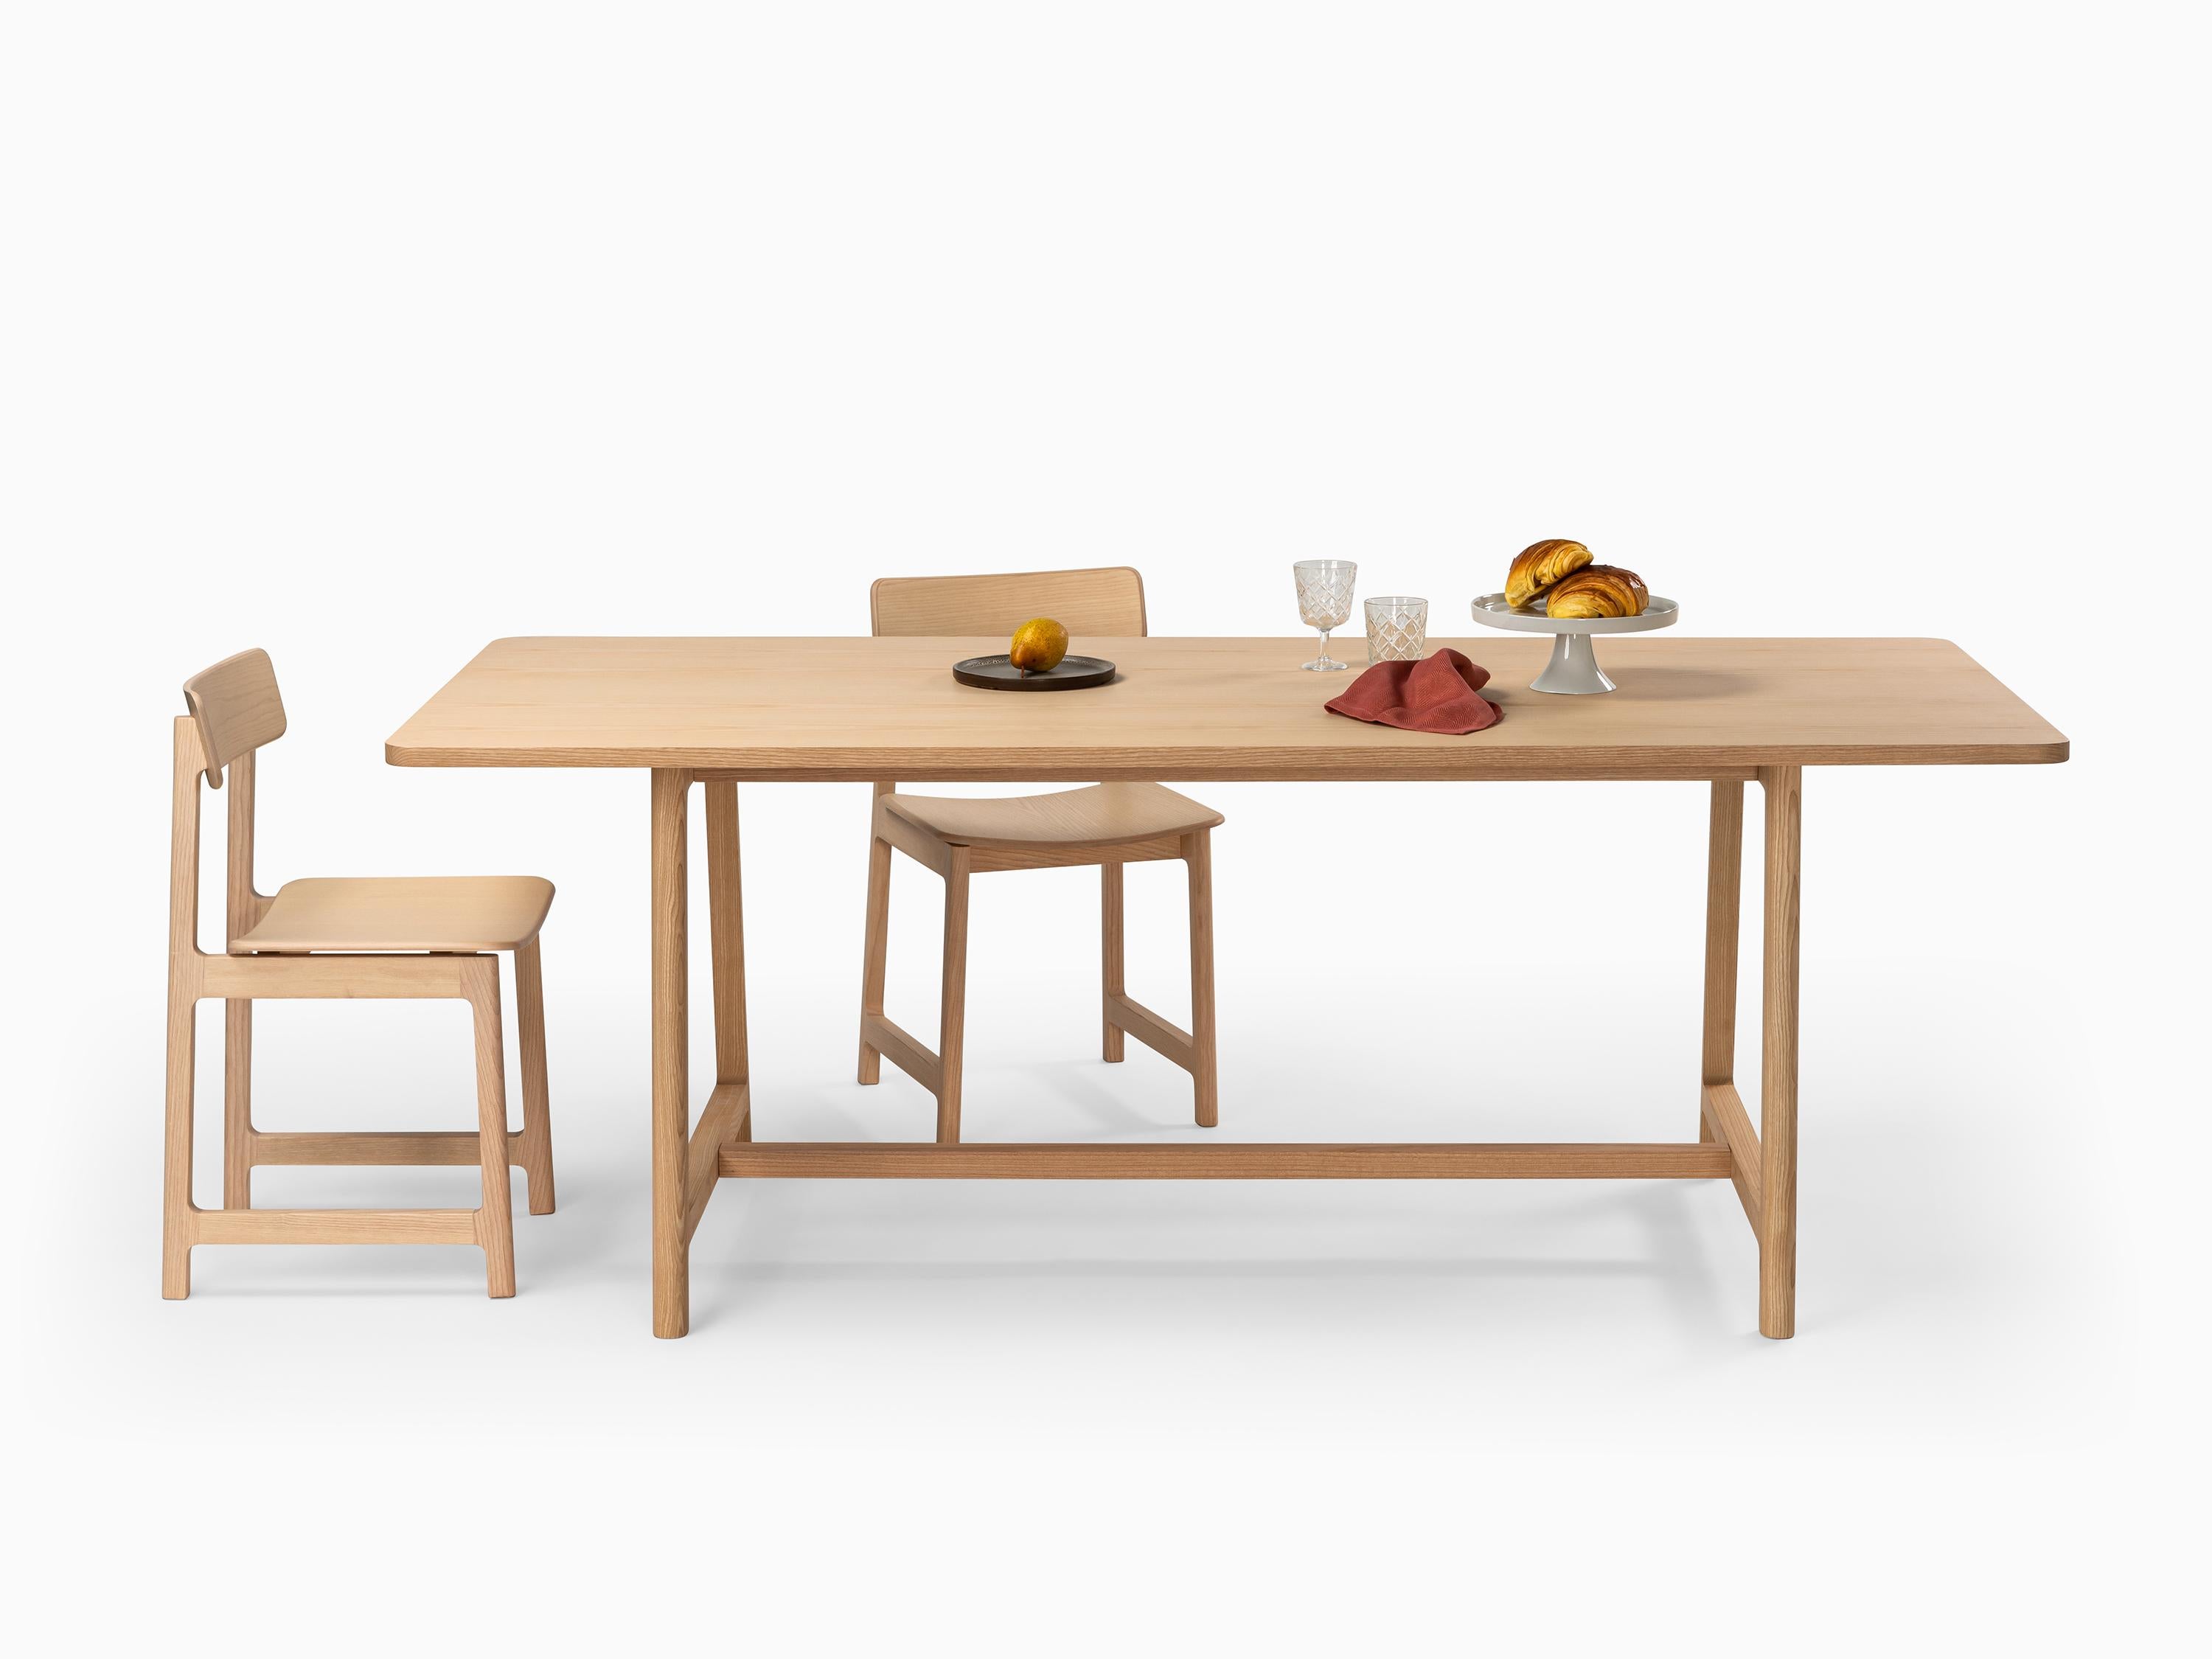 Hand-Crafted Minimalist Modern Table in Walnut Wood Frame Collection For Sale